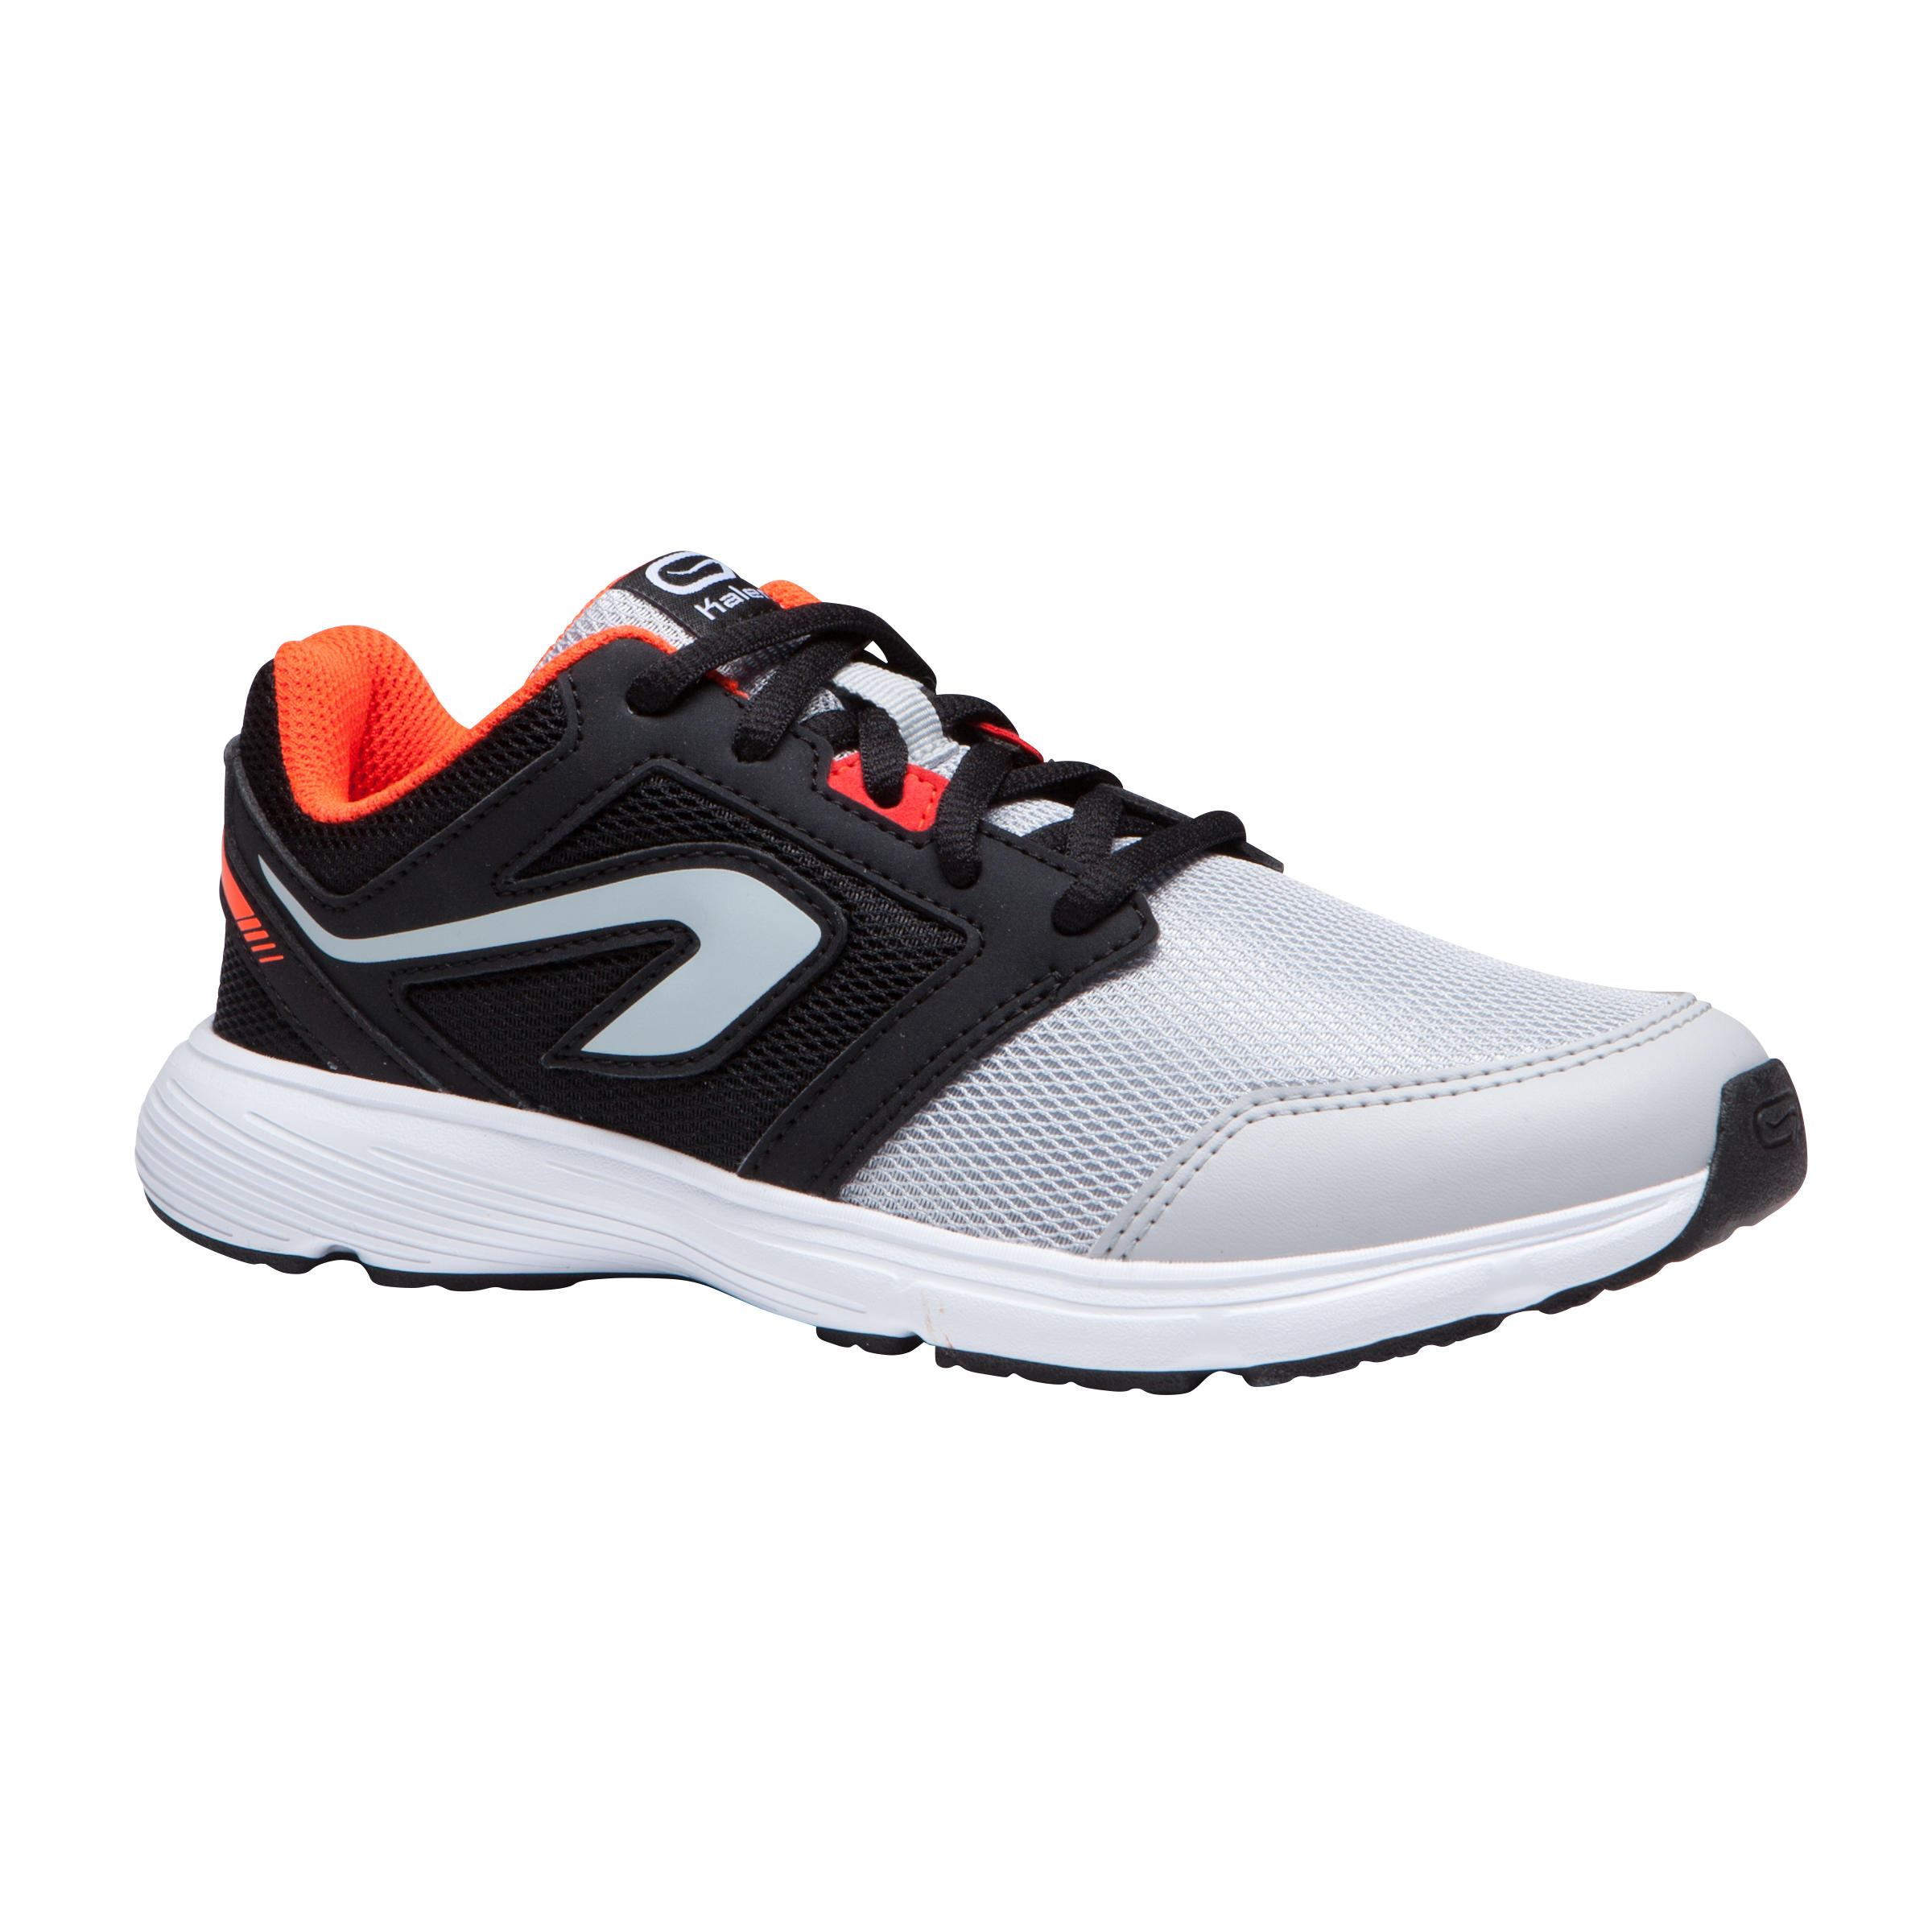 ATHLETICS SHOES WITH LACES BLACK GREY 